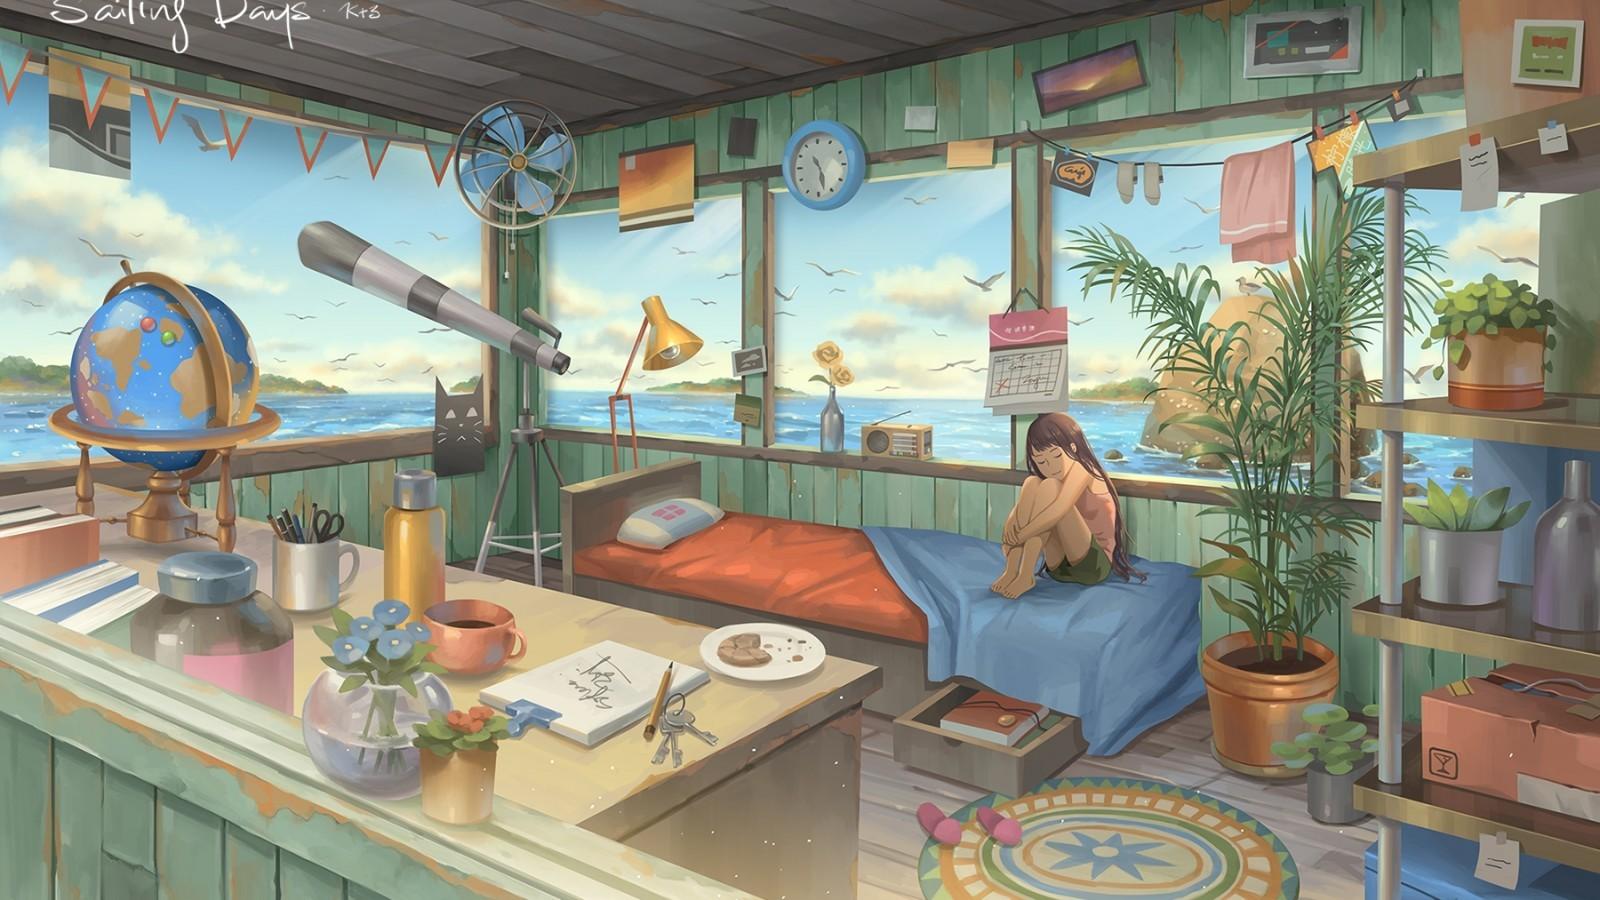 Download 1600x900 Room, Ocean, Relax, Anime Girl, Sailing